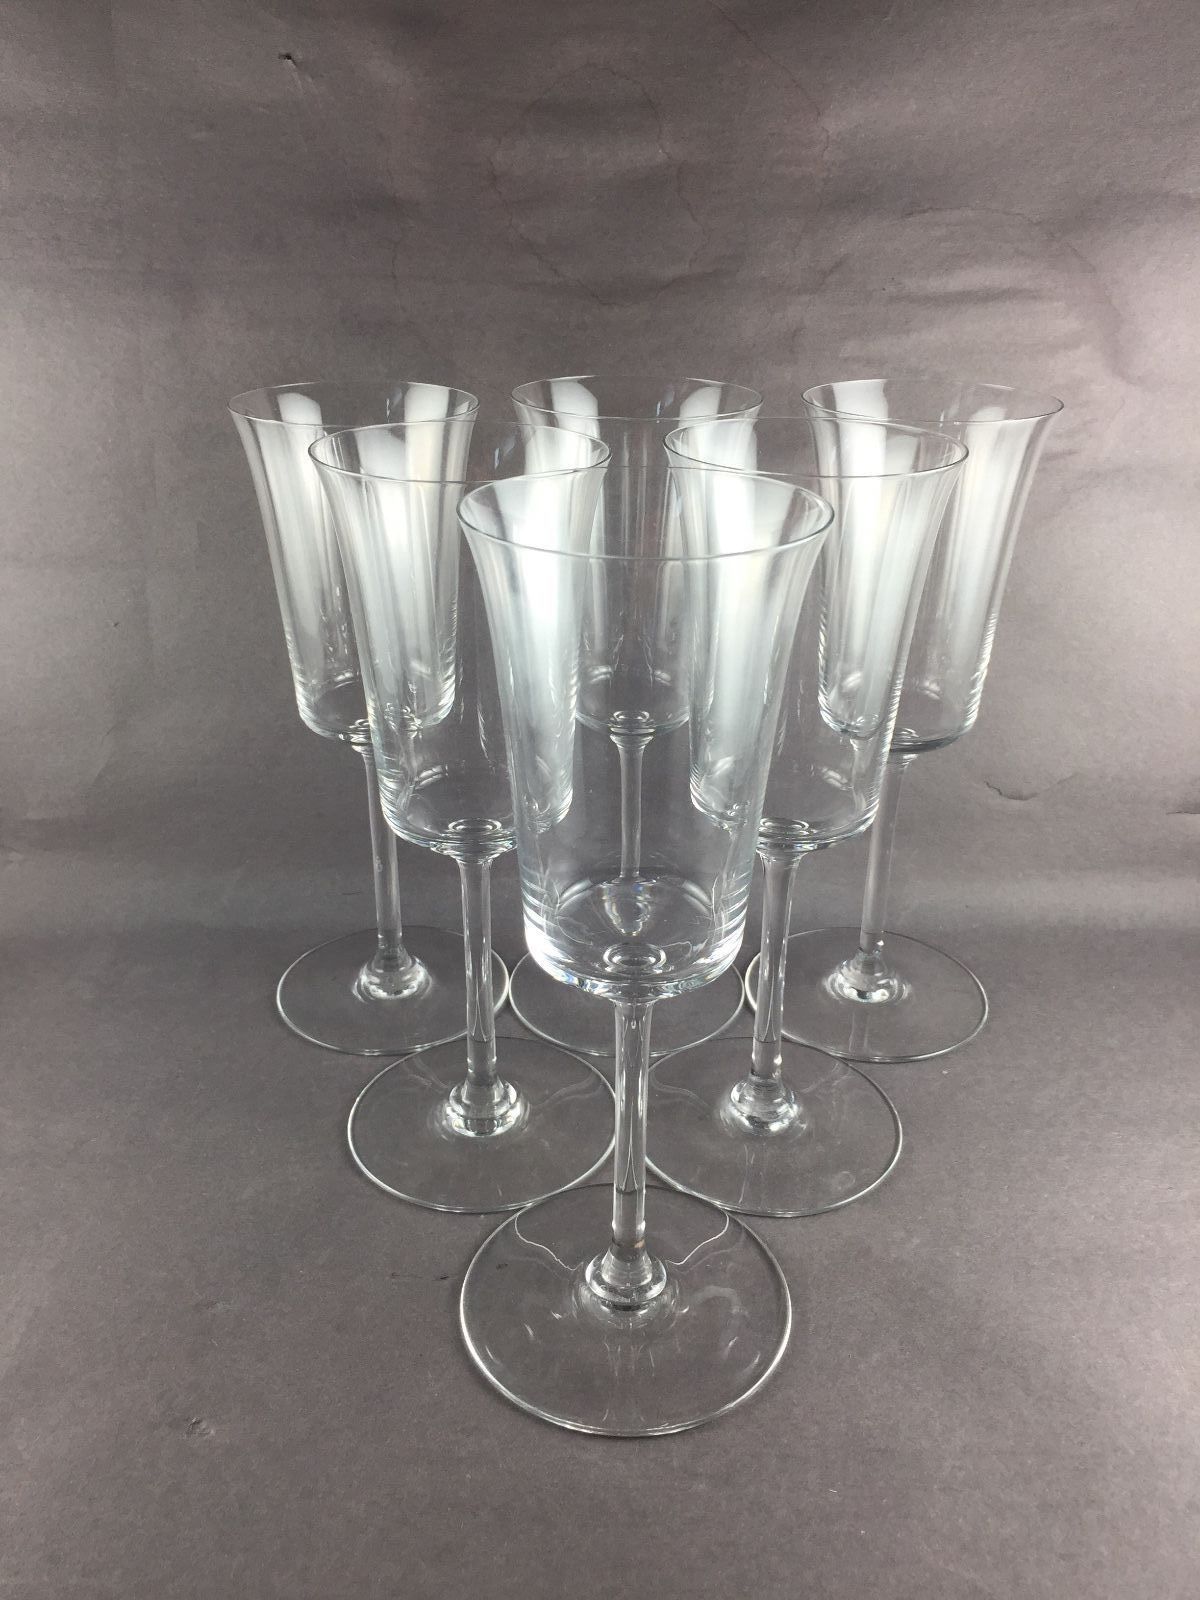 Baccarat BRANTOME Set of 6 Water Wine Goblets Glasses 8 7/8" tall